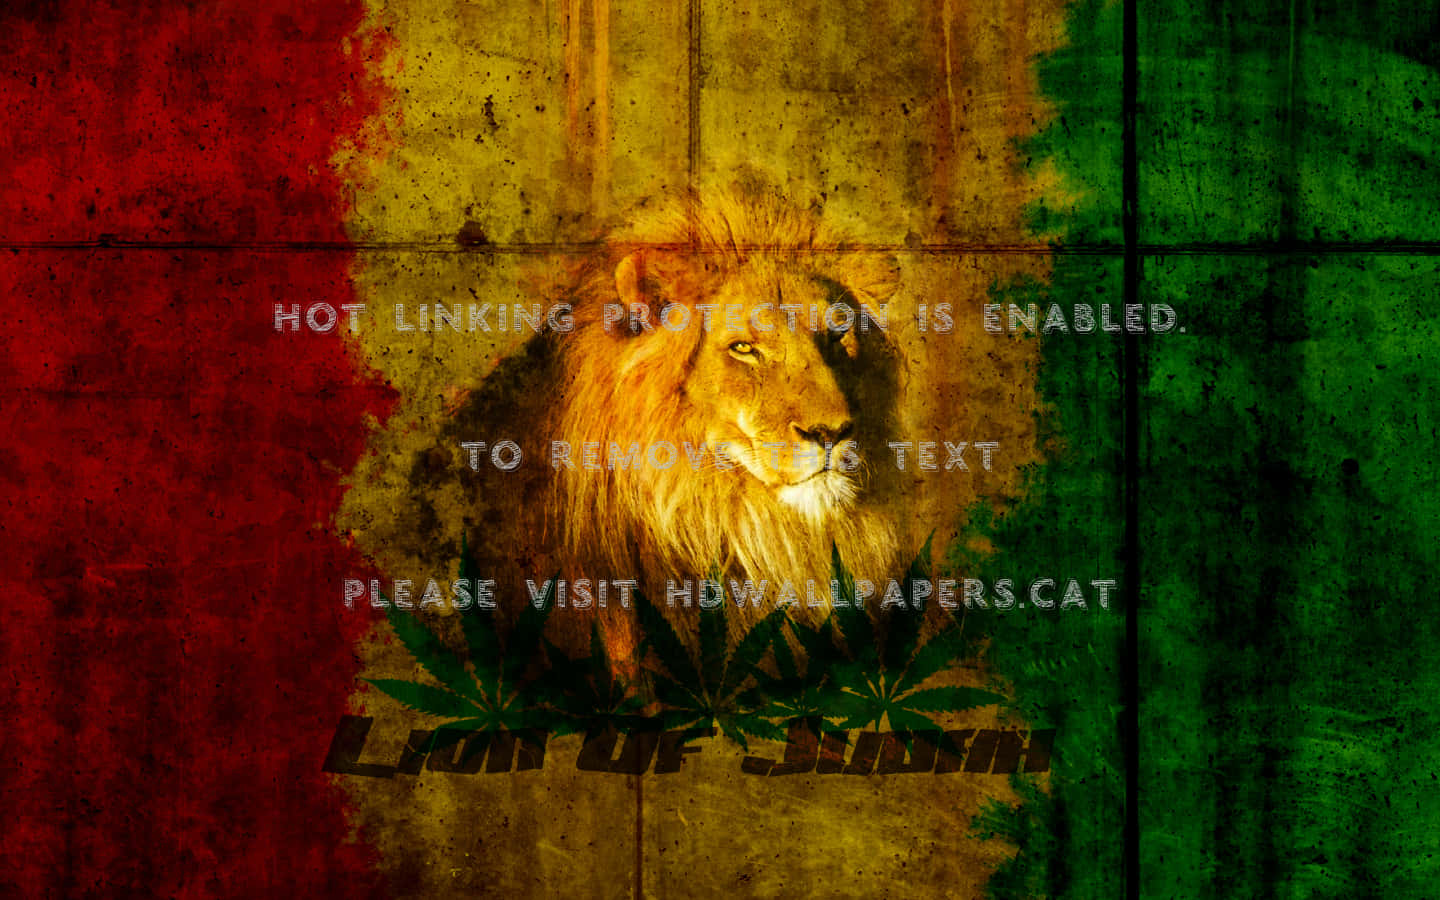 "The Mighty Lion of Judah"